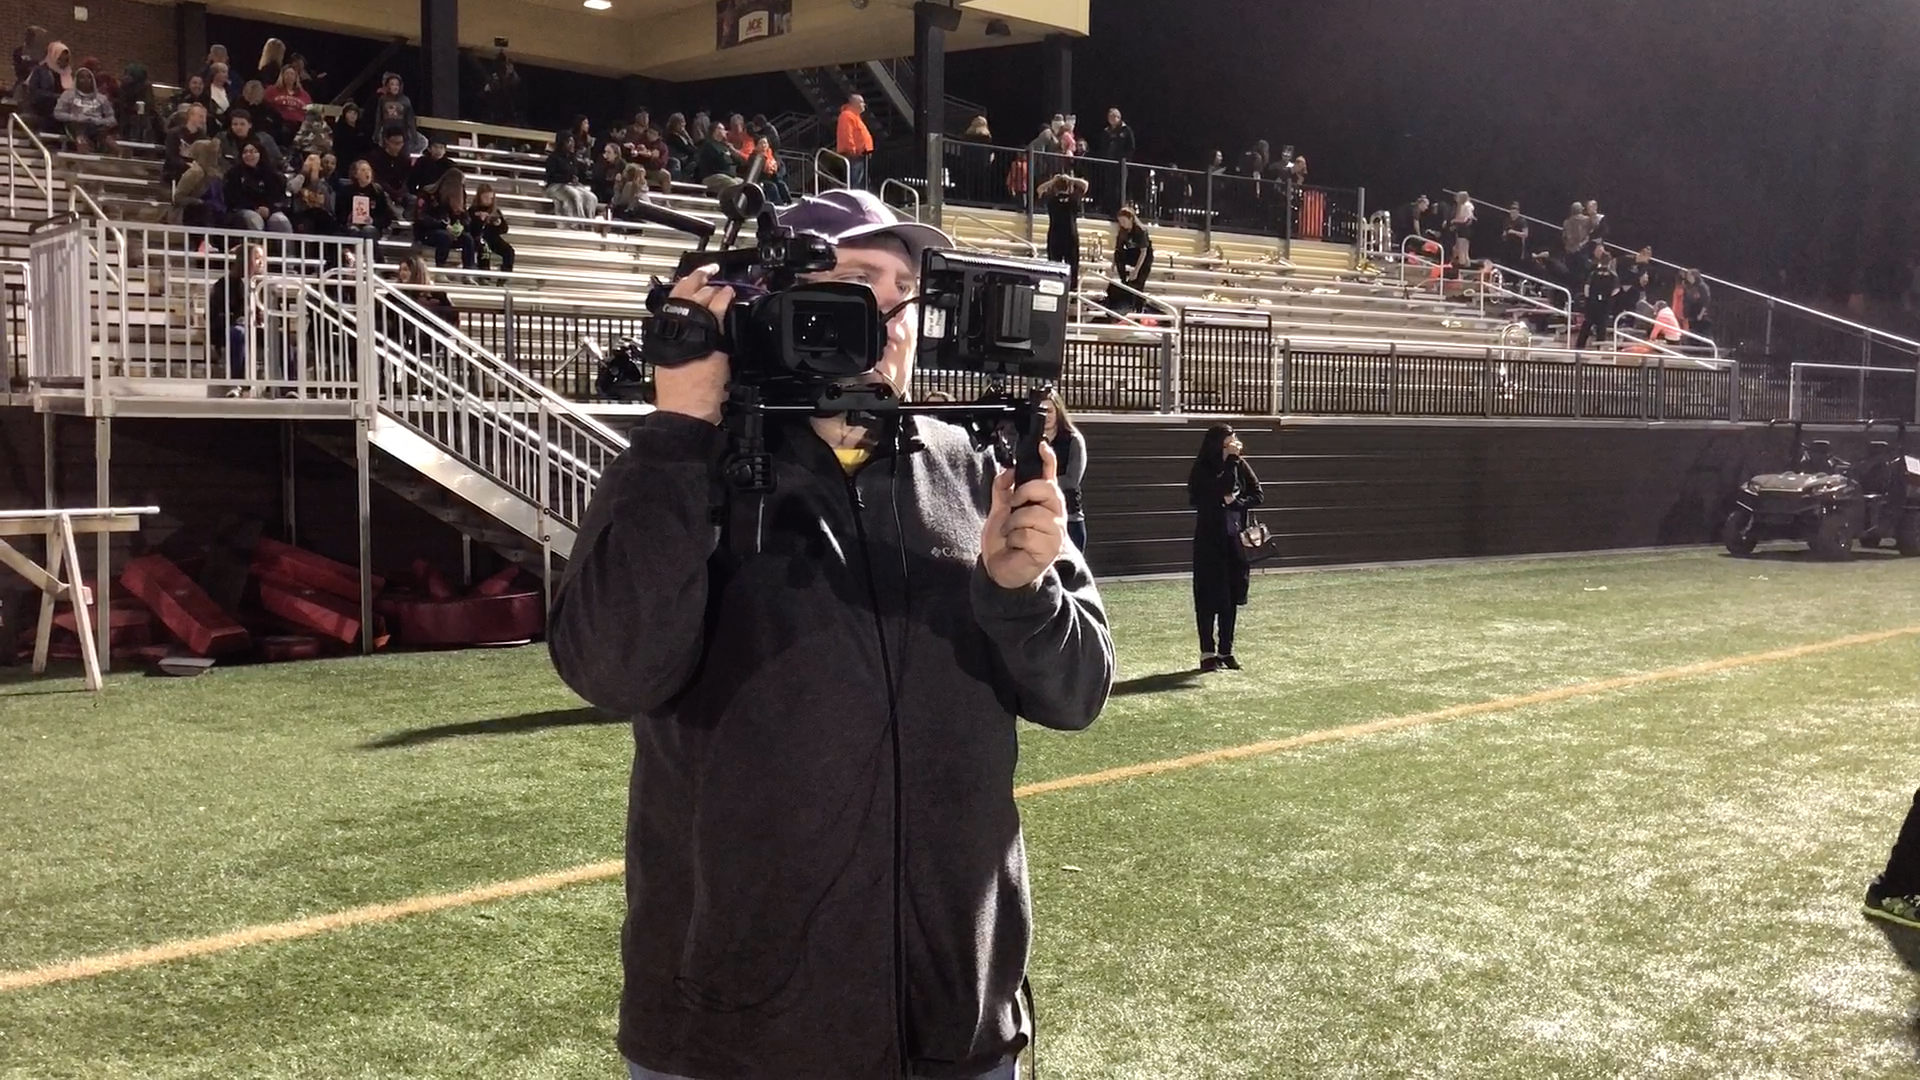 Nick Dalhoff working wireless sideline camera at a Marshall HS football game